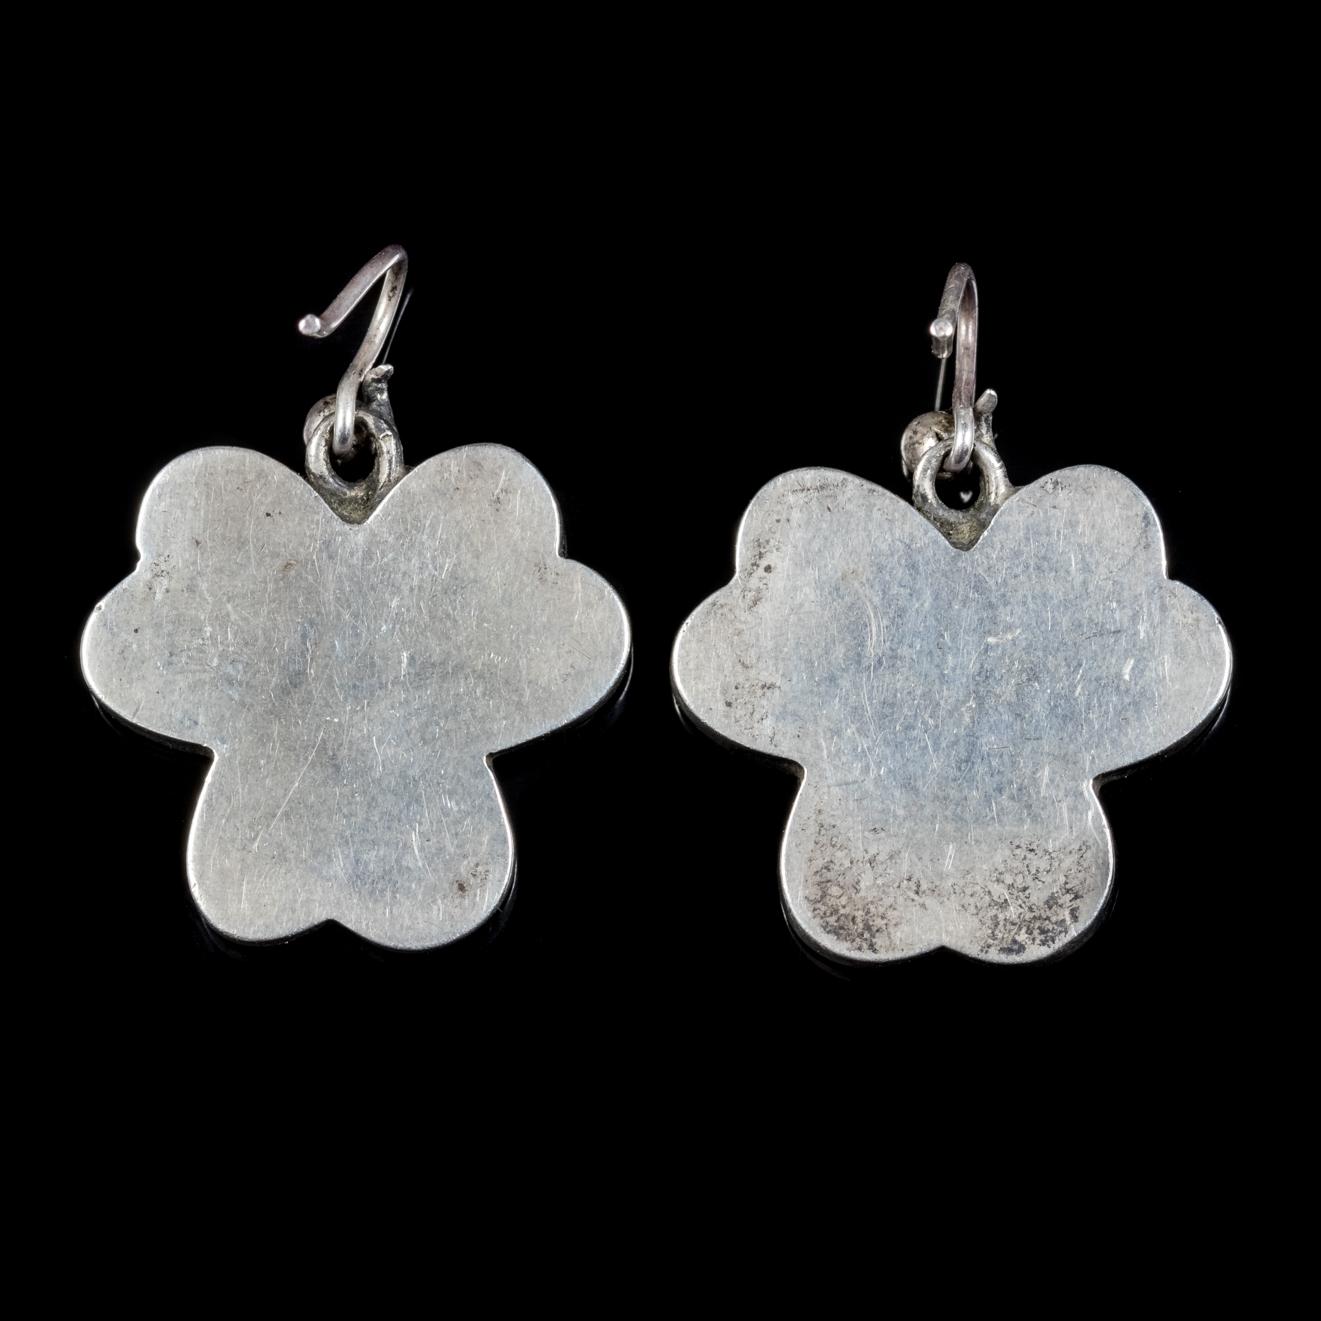 A wonderful pair of antique Scottish shamrock earrings from the Victorian era, Circa 1880.

The lovely pair are fashioned in the shape of shamrocks and feature lovely Scottish Granite stones cut to fit each of the three leaves.

Shamrocks were a